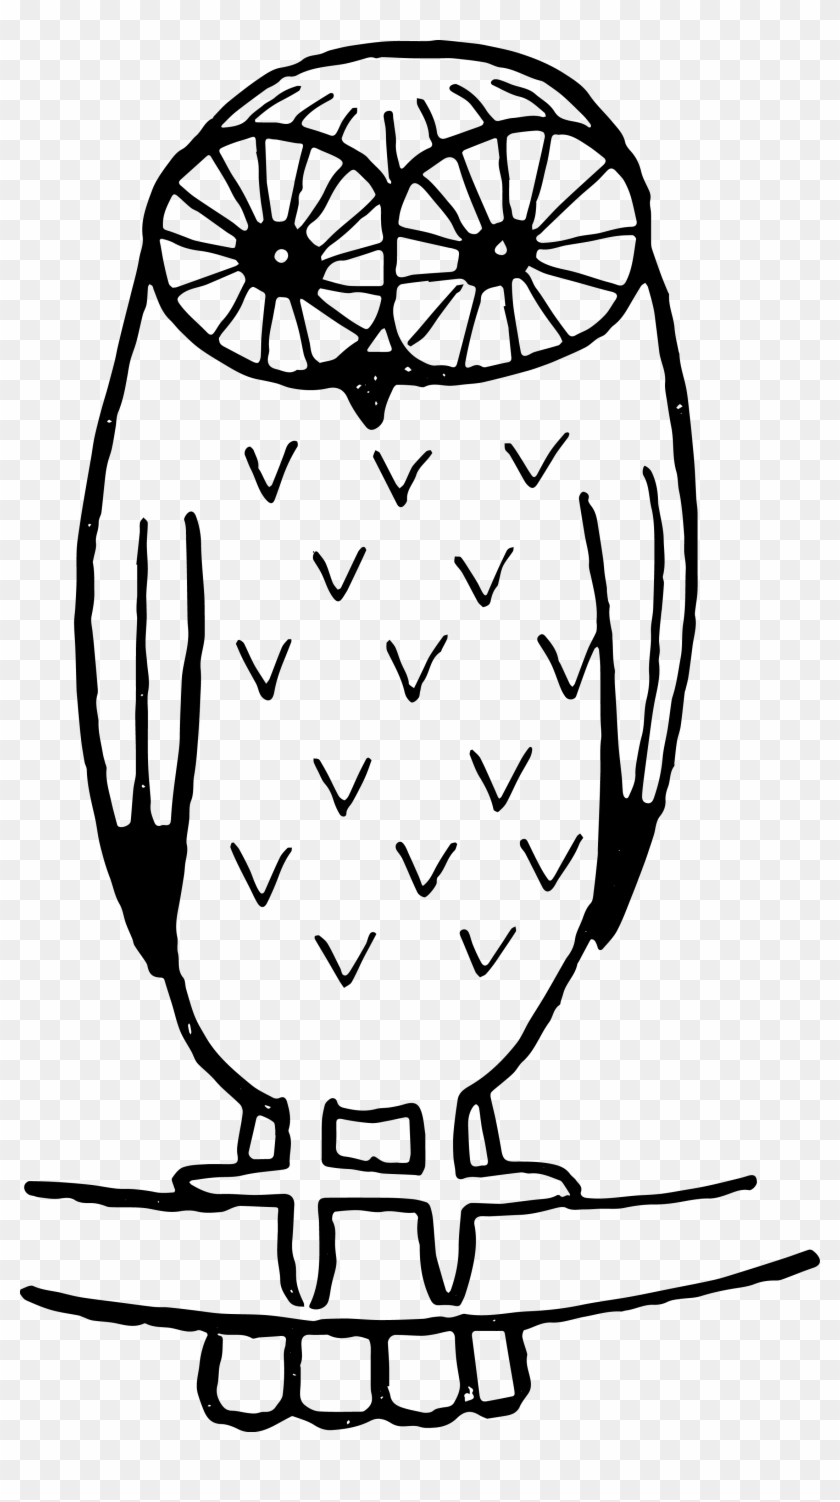 Royalty Free Stock Retro Owl Vector - Stock Vectors Png Royalty Free Clipart #3409125